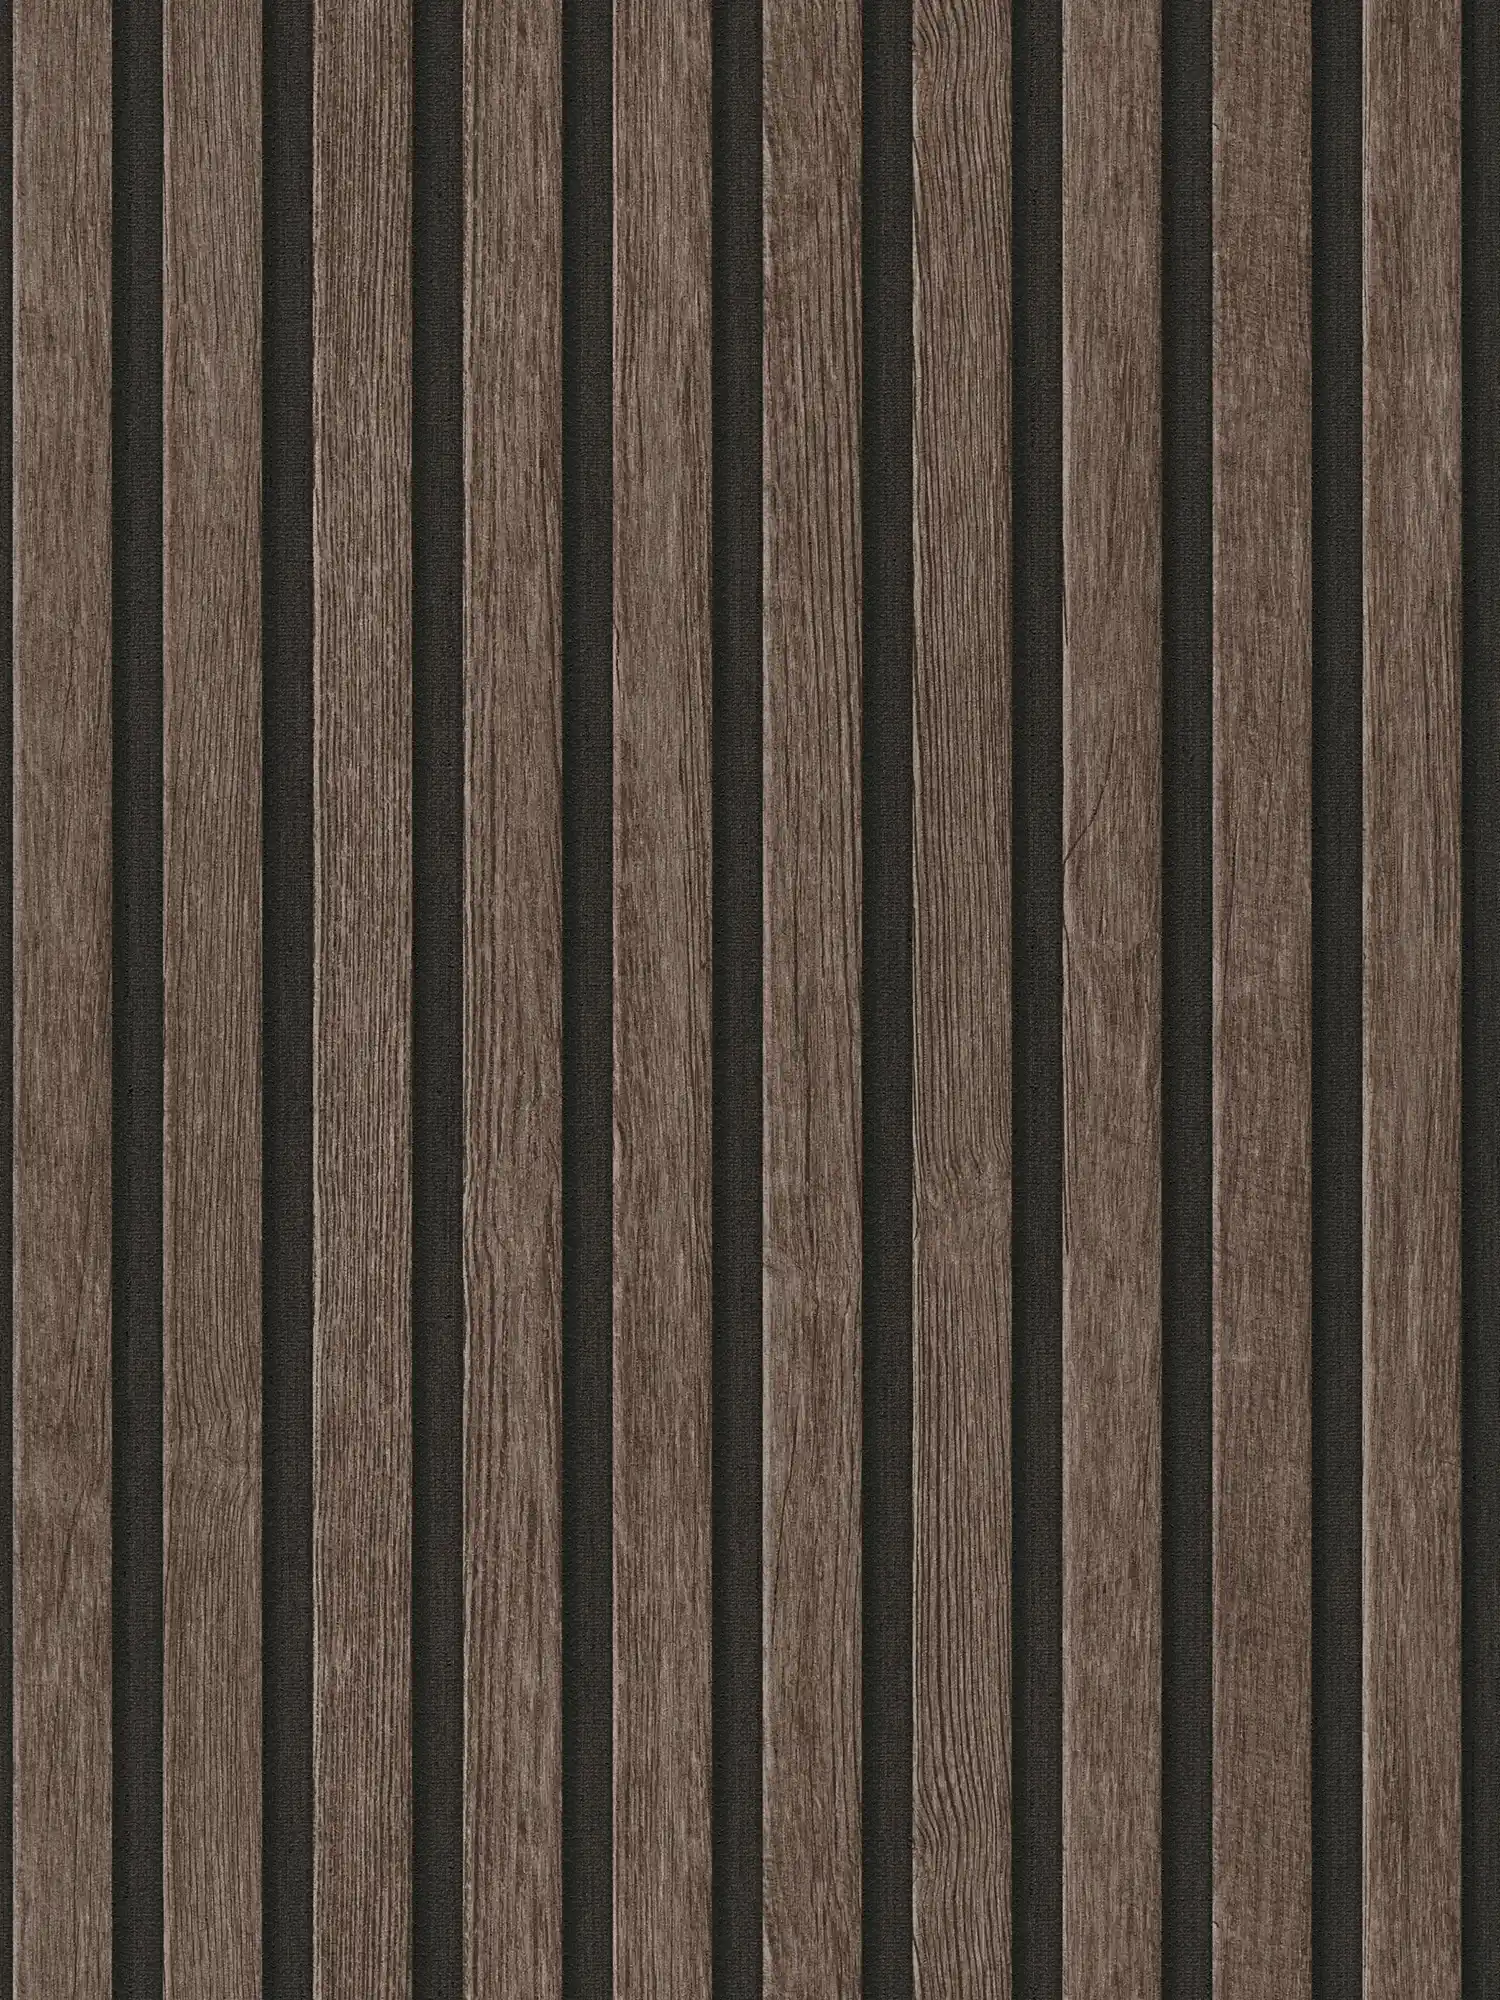         Wood panel wallpaper with fine structure - brown
    